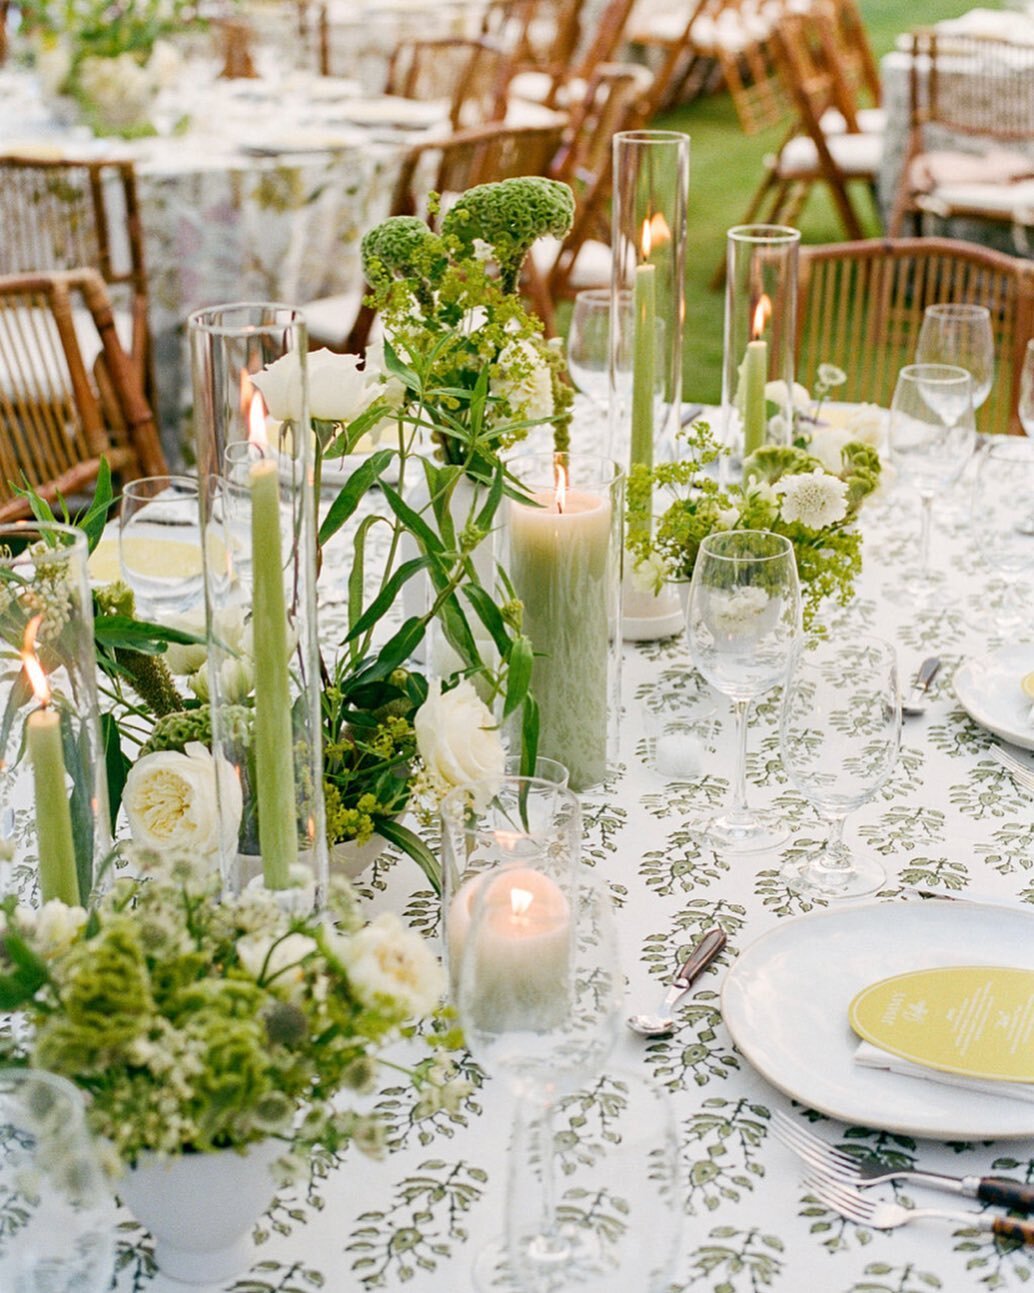 Recipe for the perfect table top mix:
*airy, florals 
*punchy pattern 
*colorful candles